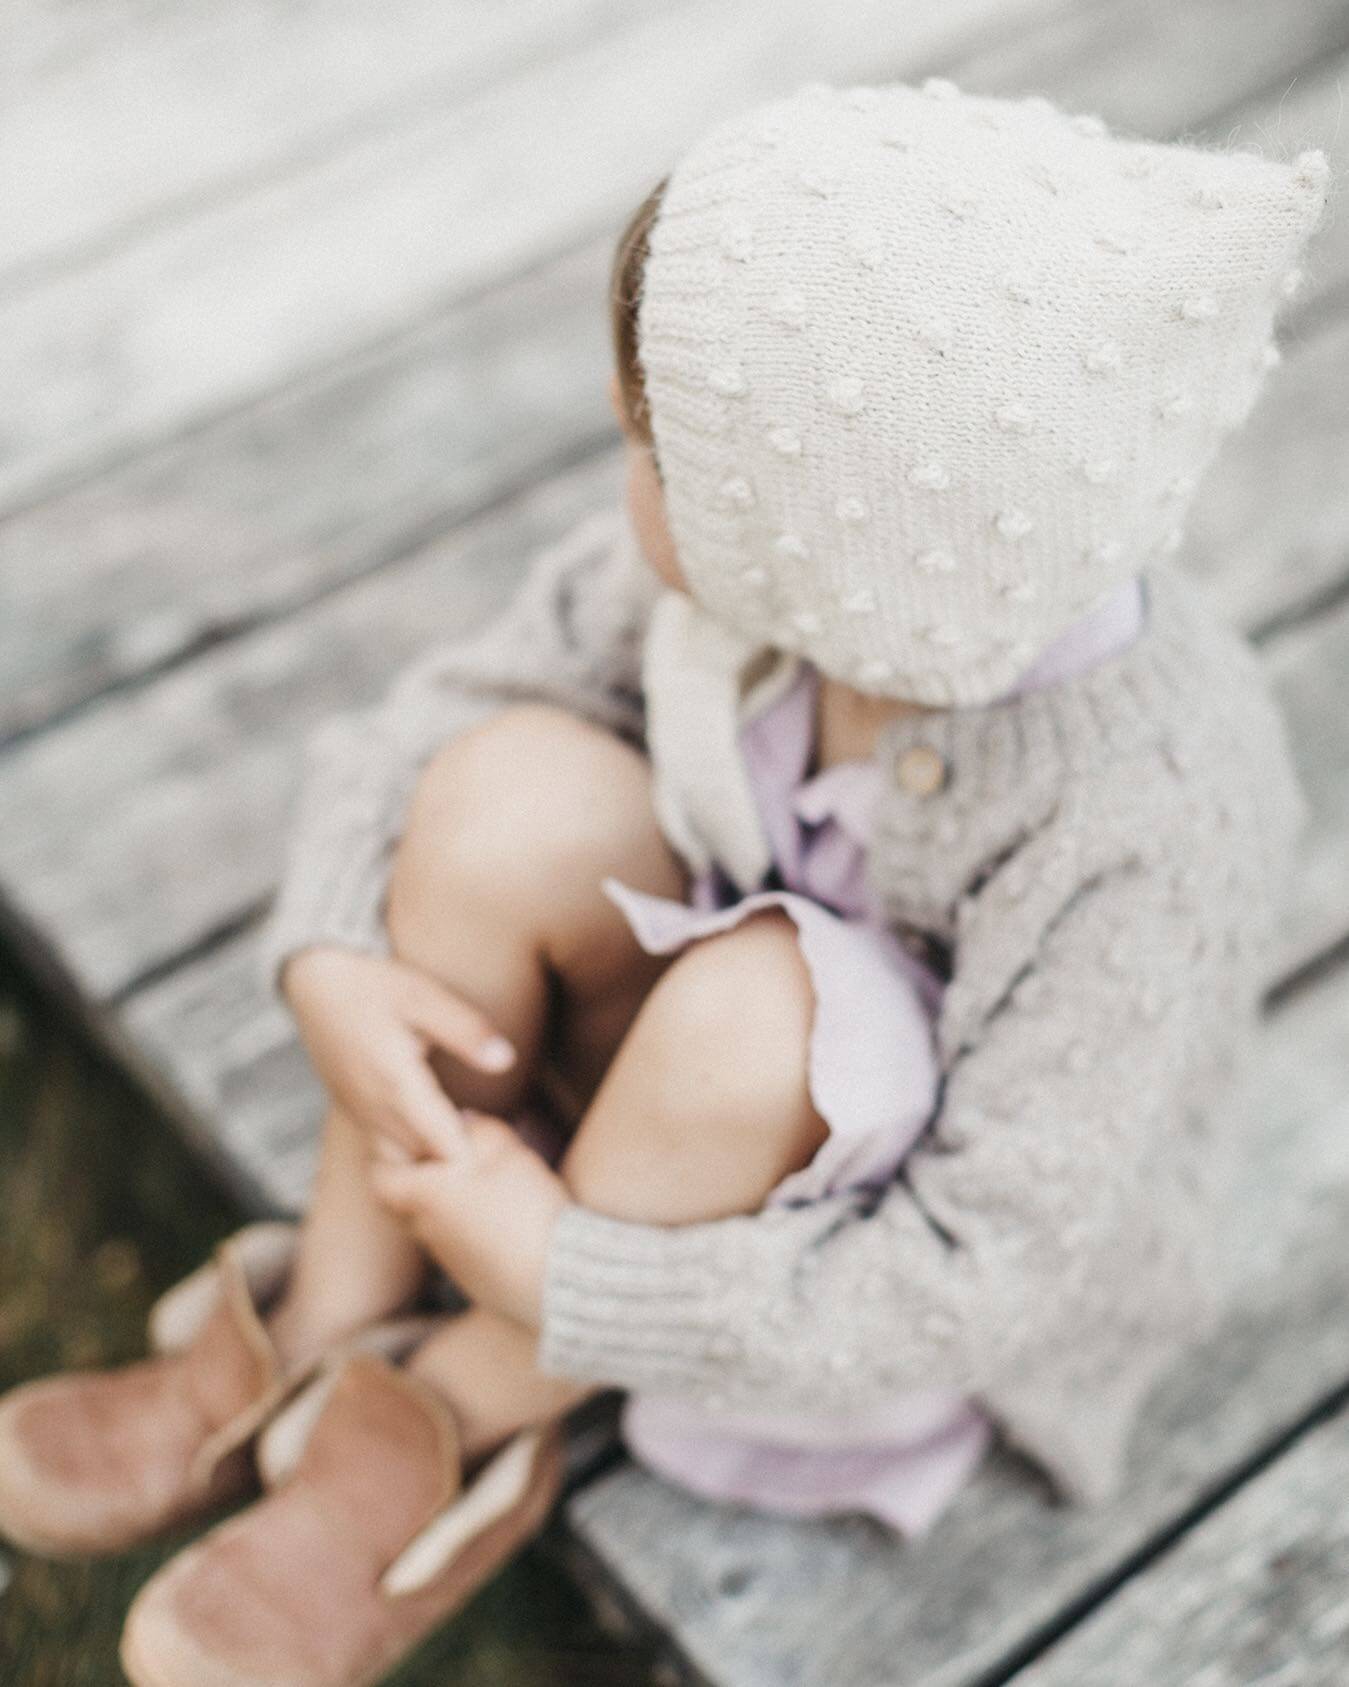 Slow and natural clothes for your little ones